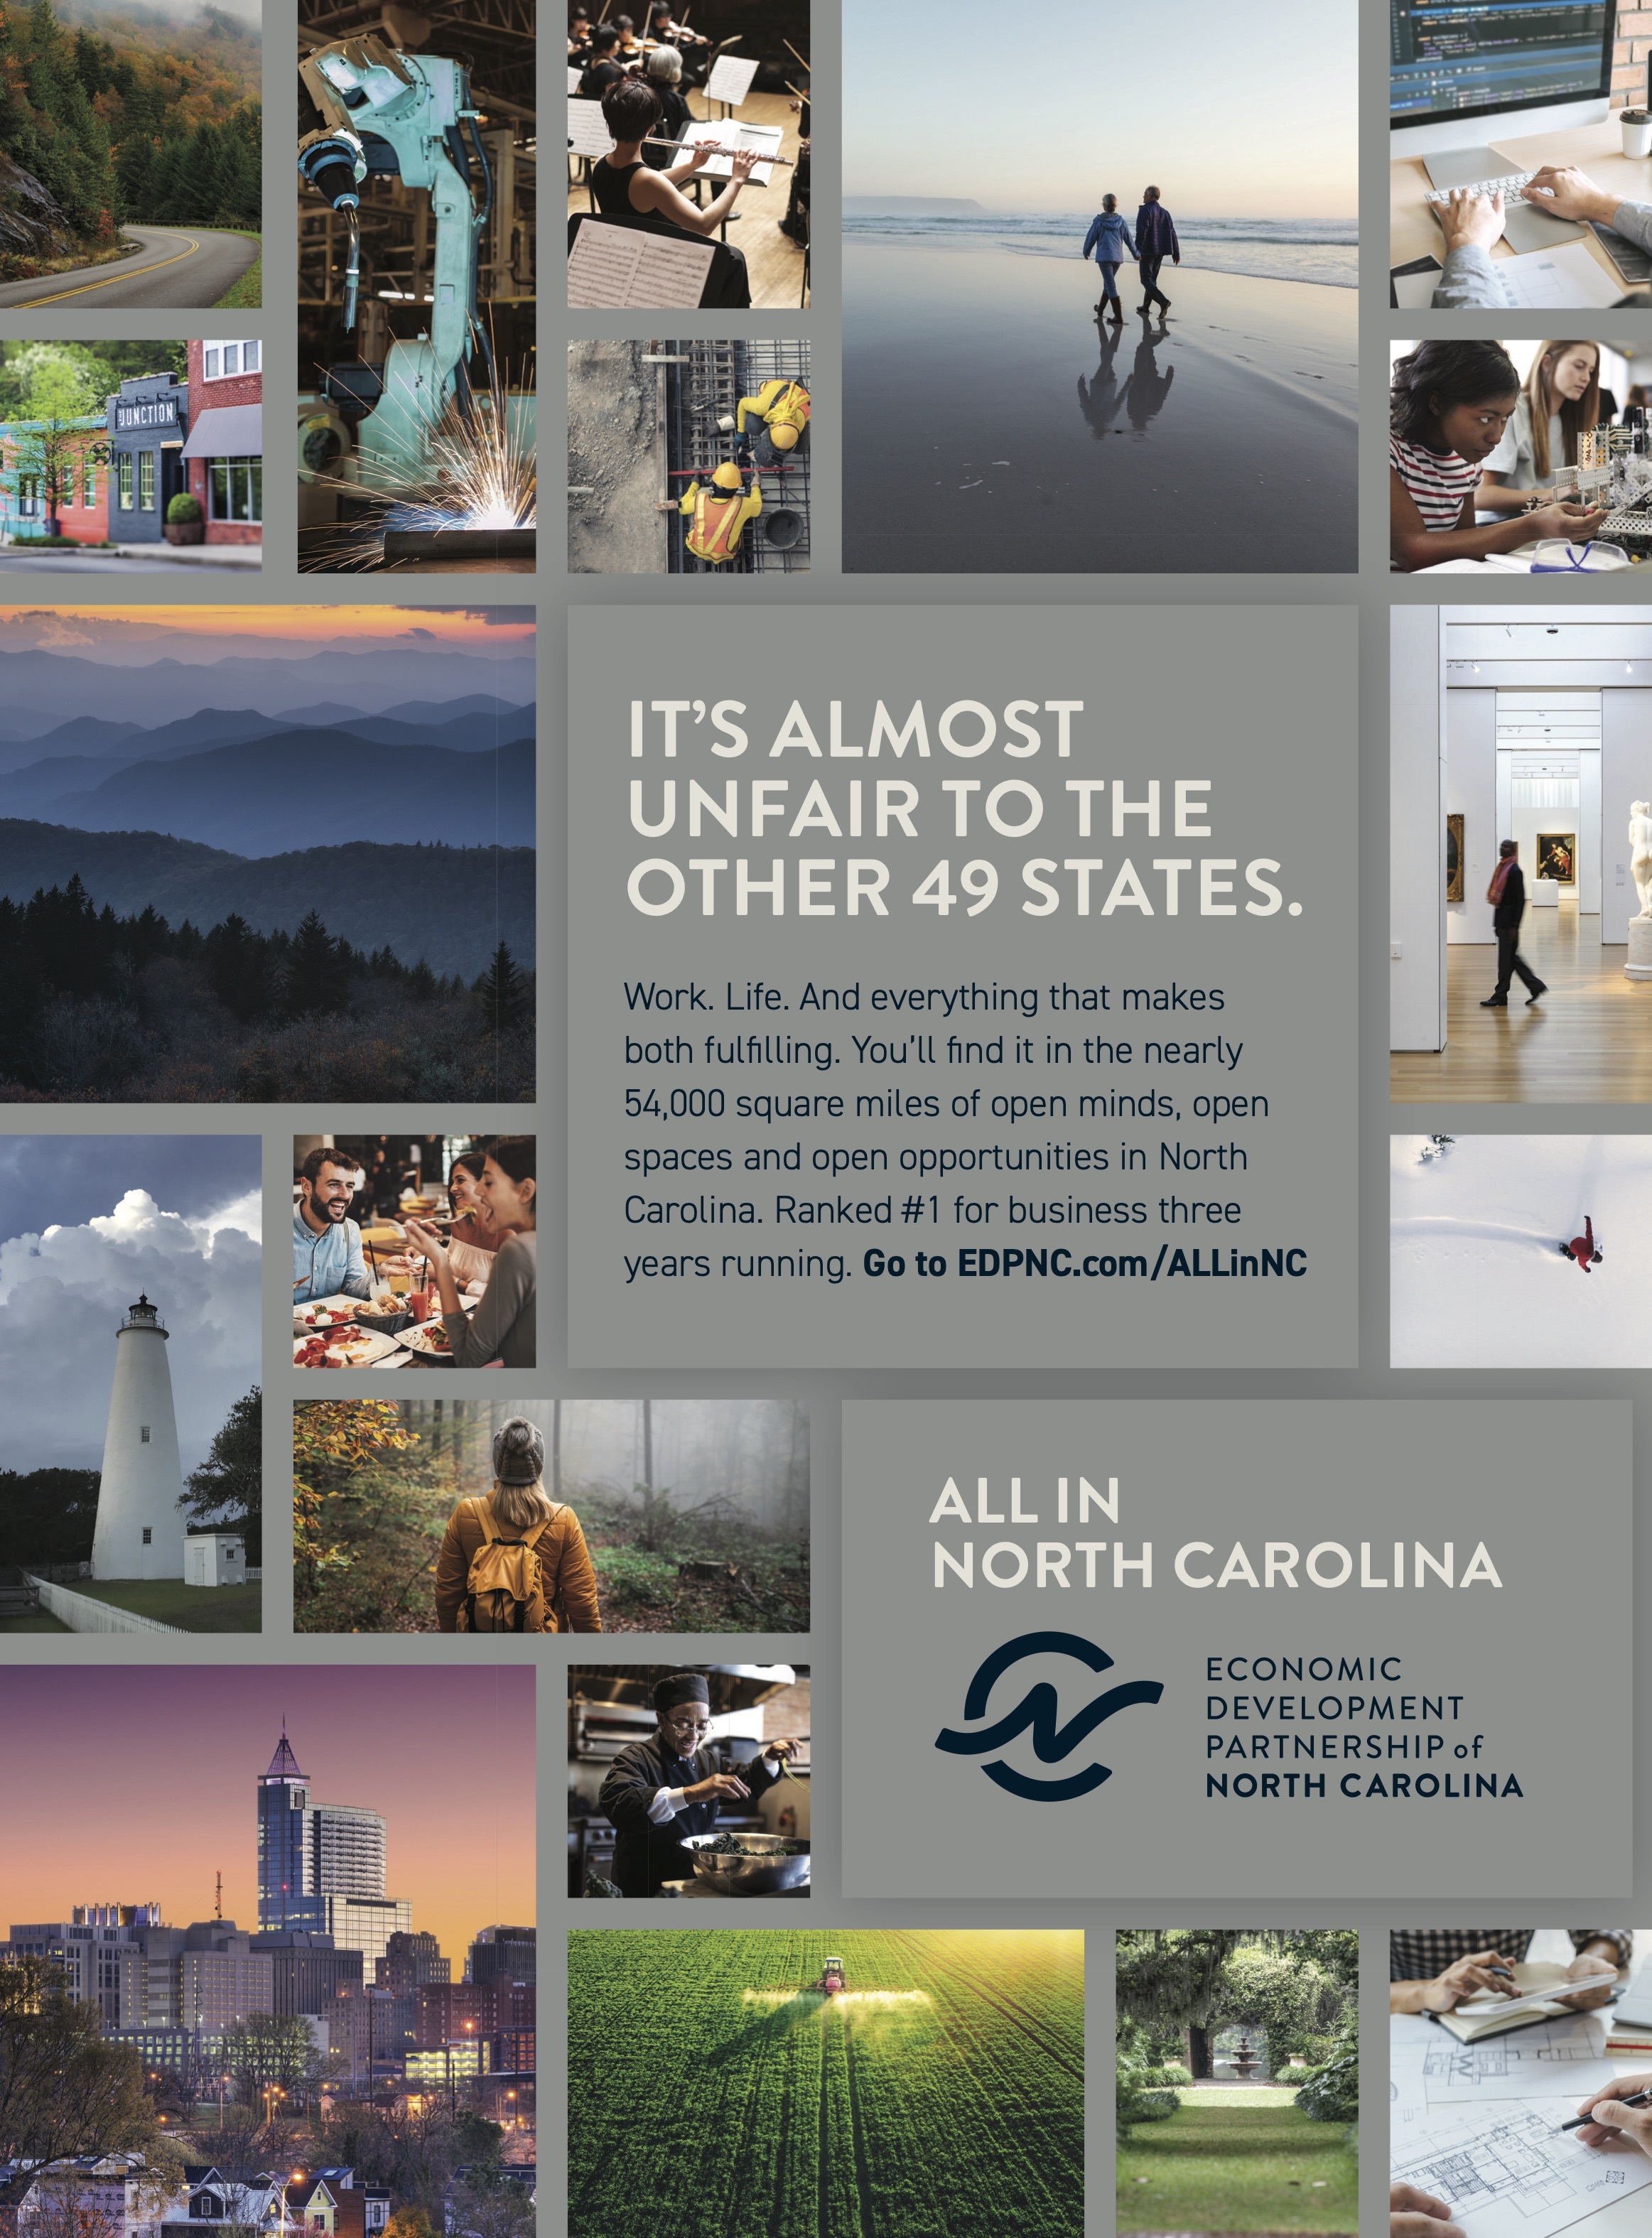 Campaign to Recruit Businesses and Workforce to North Carolina